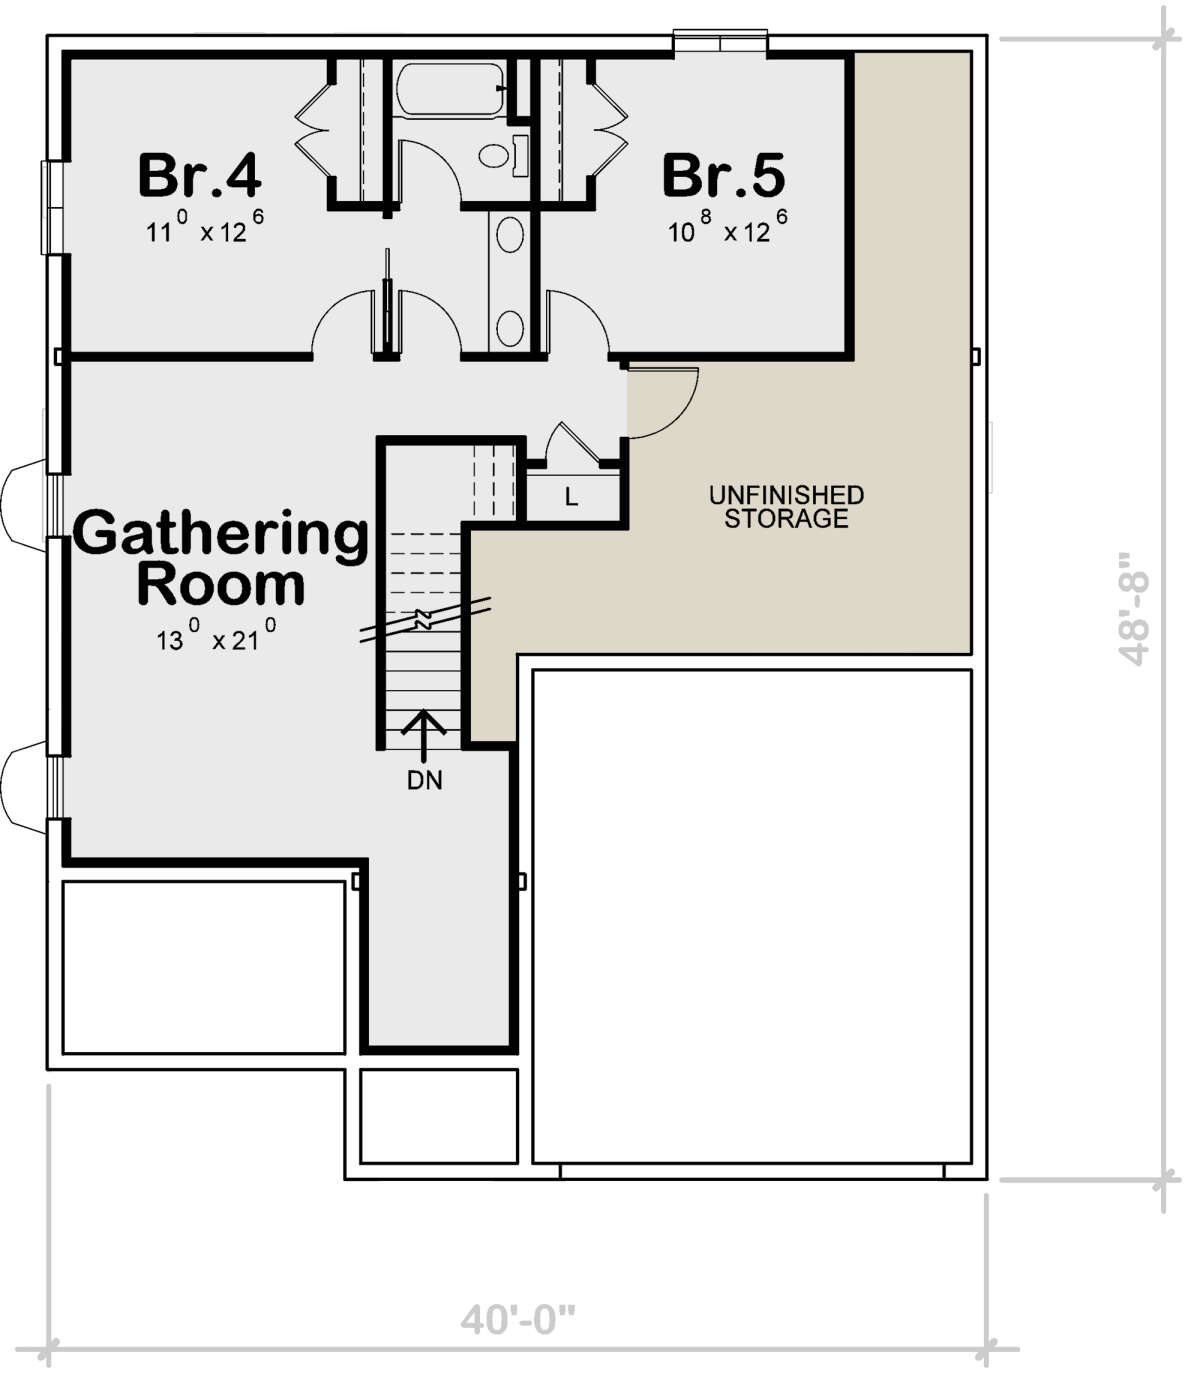 Traditional Plan: 2,196 Square Feet, 5 Bedrooms, 3 Bathrooms - 402-01748